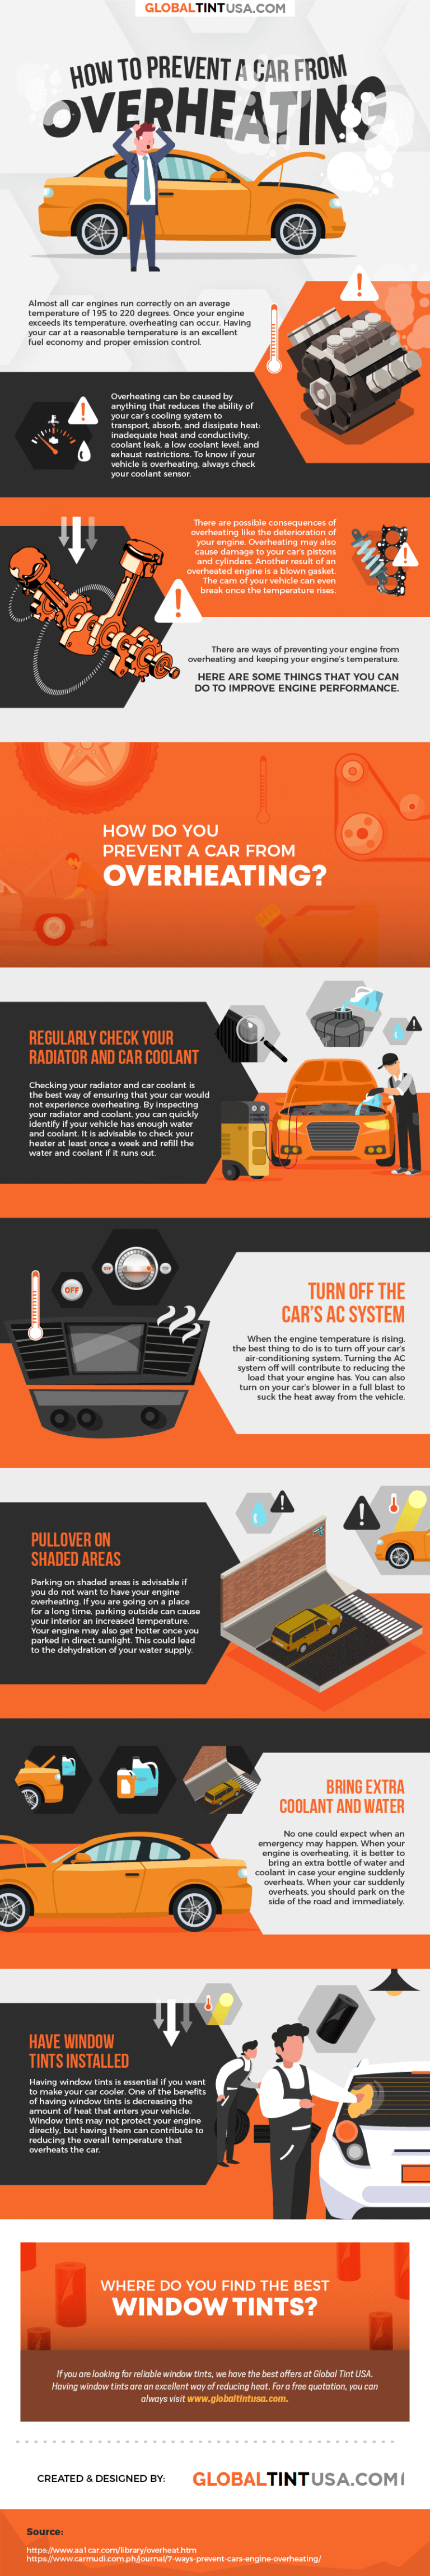 How to Prevent A Car from Overheating